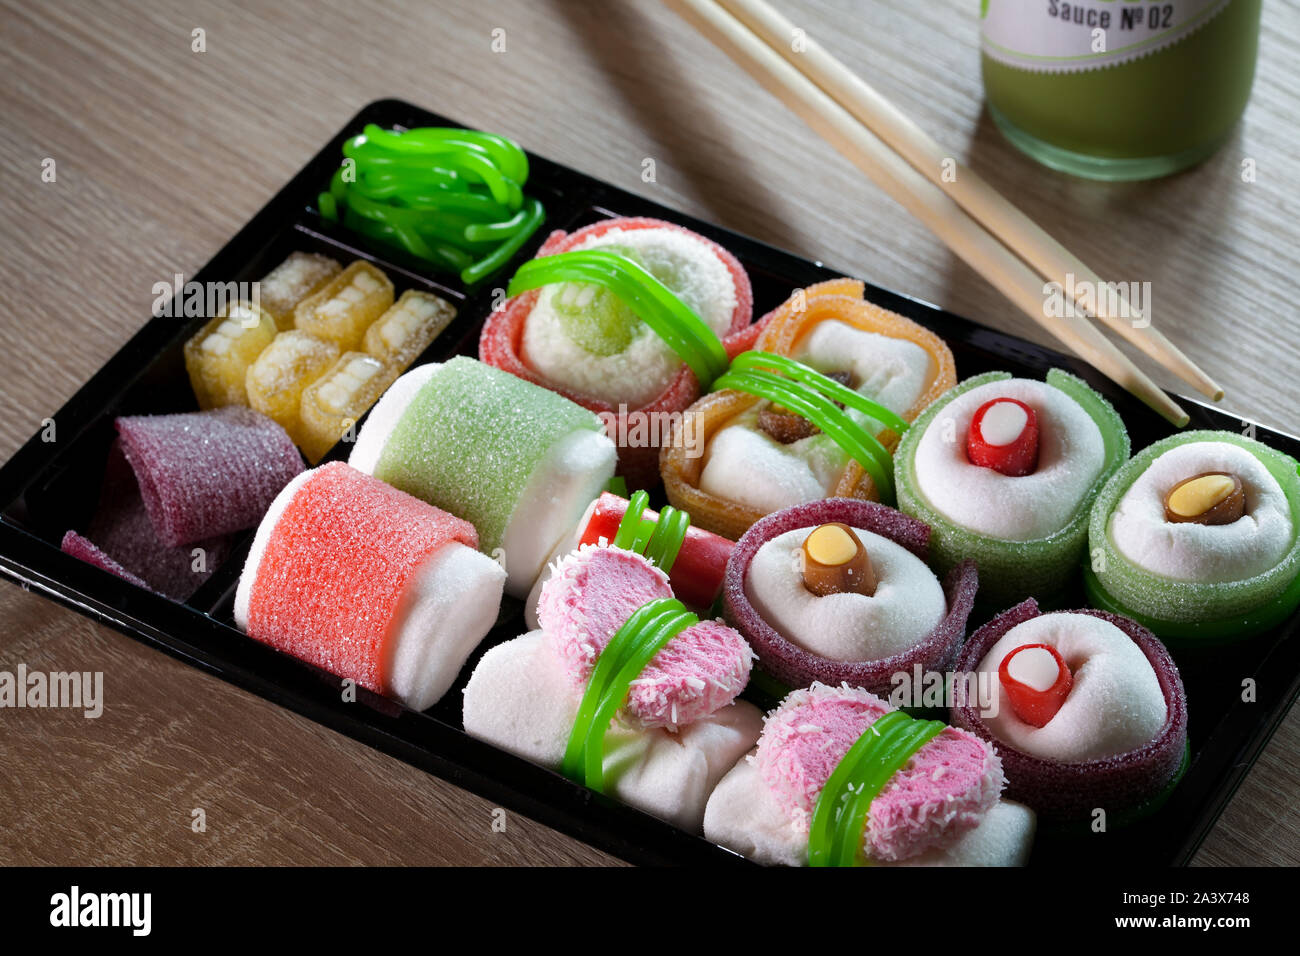 Sushis made of sweets in a bento box Stock Photo - Alamy